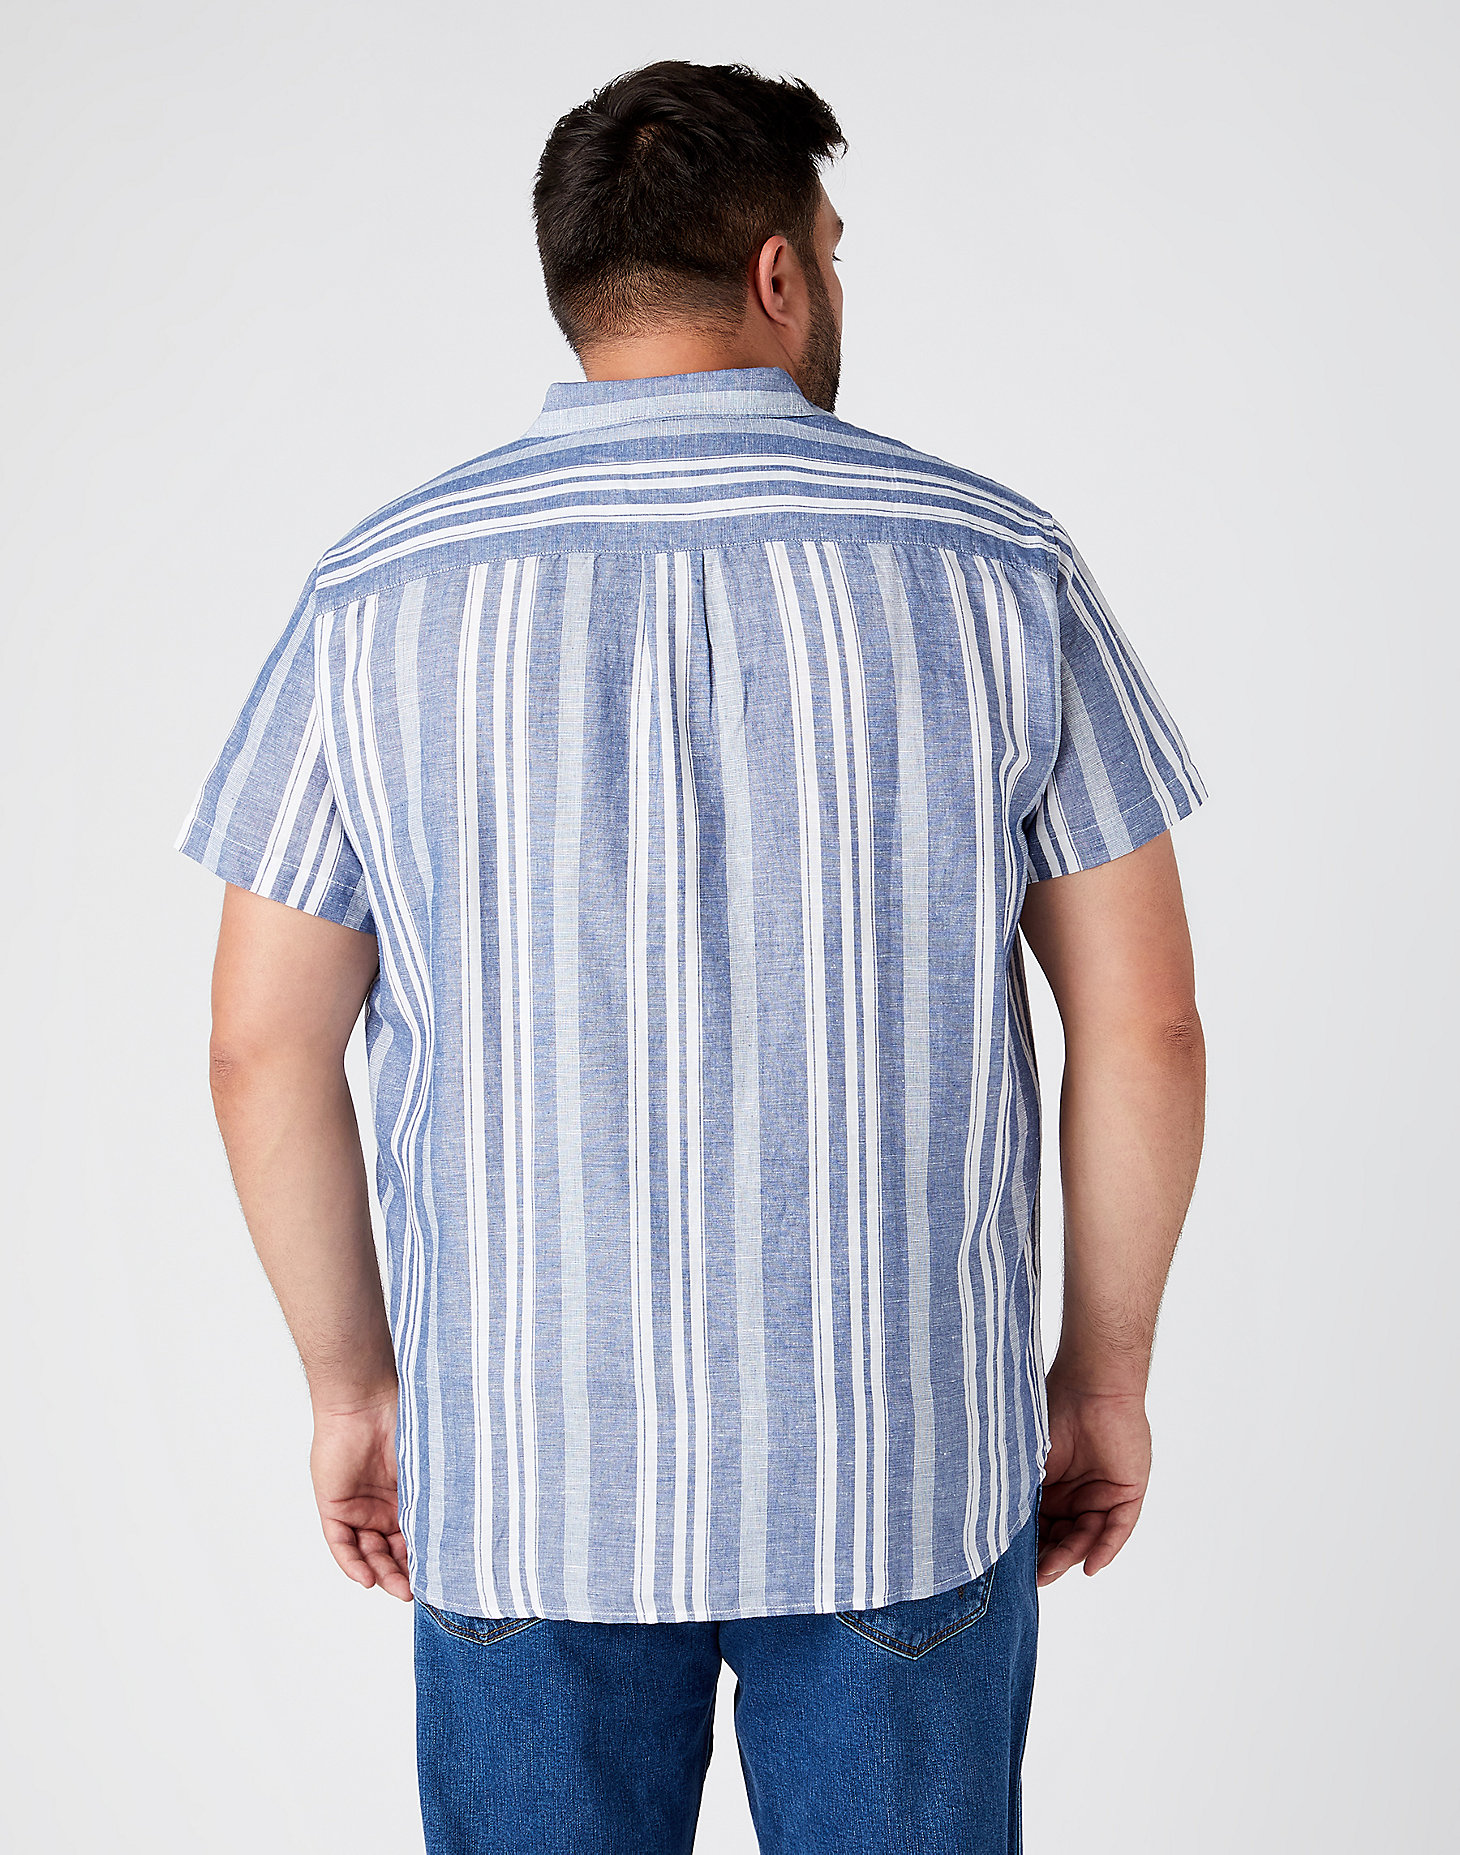 Short Sleeve One Pocket Shirt in Real Navy alternative view 3